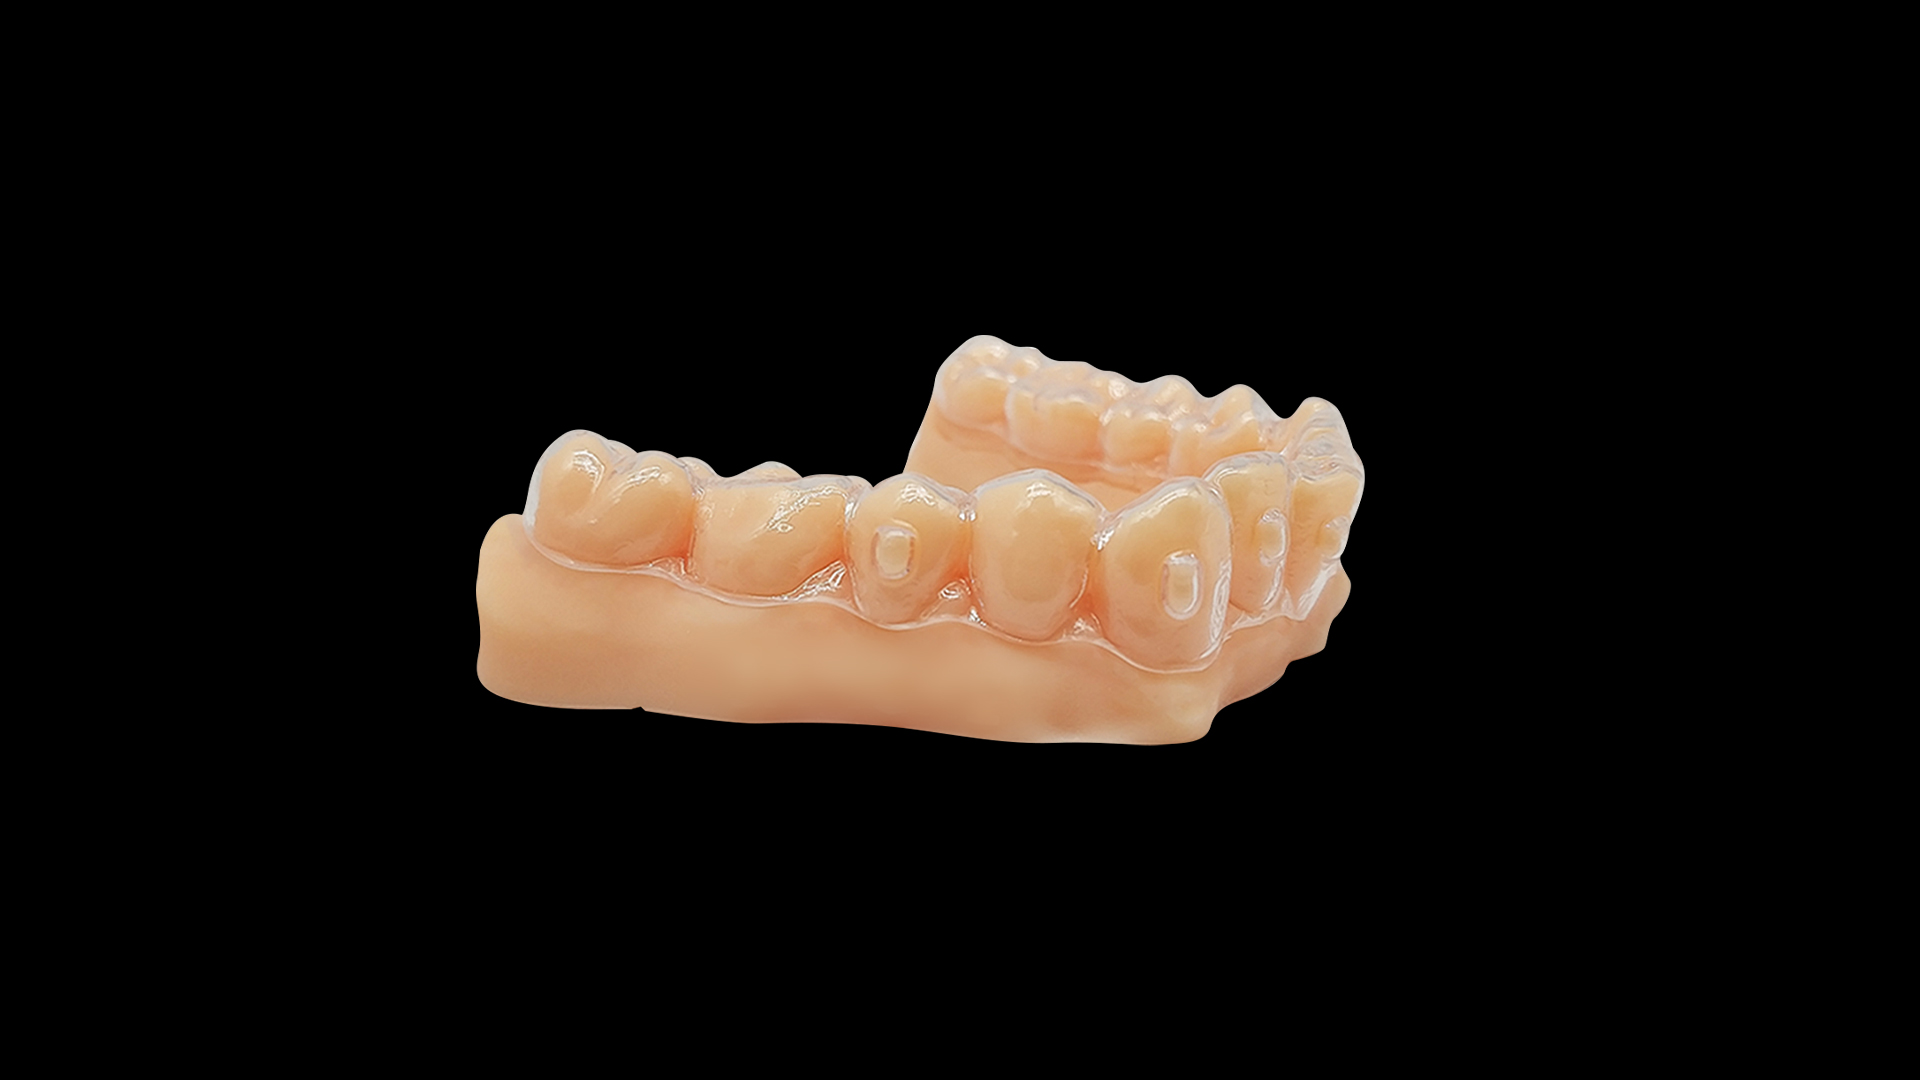 What is a 3d printed orthodontic model? How to do 3D printing orthodontic model?